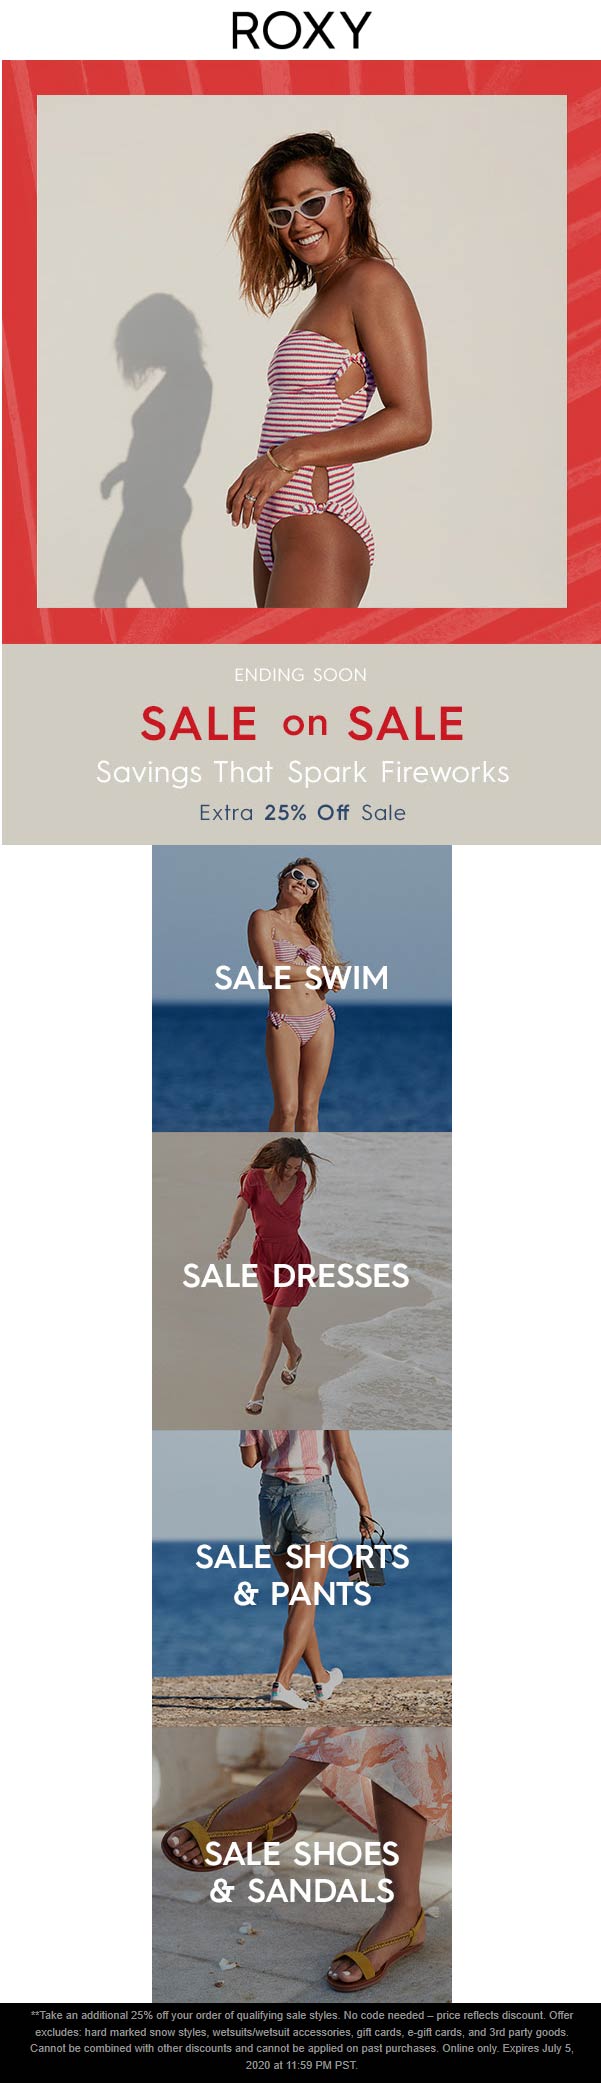 ROXY stores Coupon  Extra 25% off sale items online at ROXY #roxy